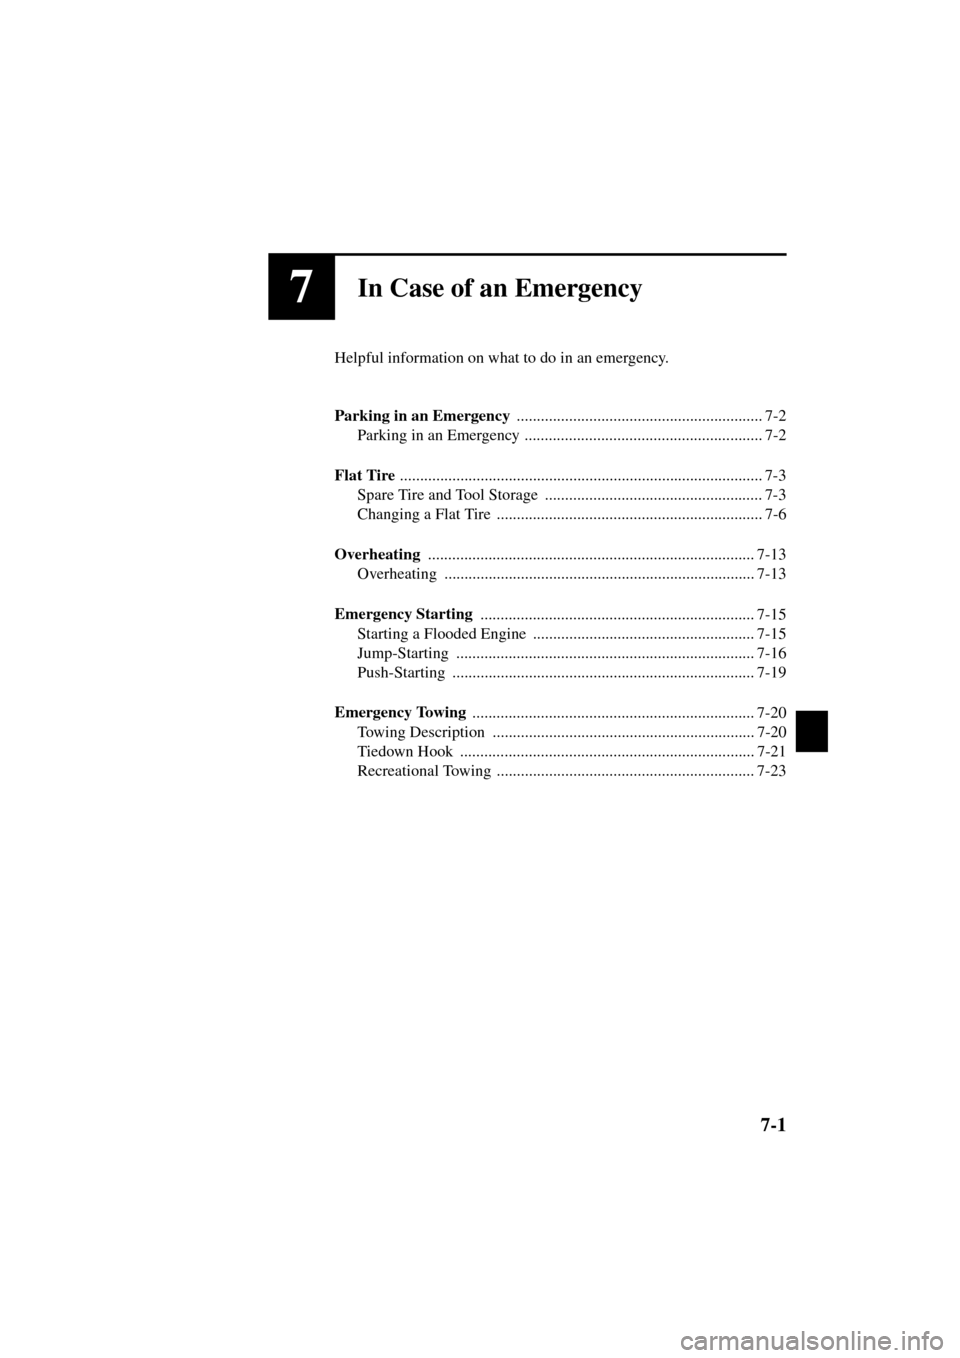 MAZDA MODEL 3 HATCHBACK 2004  Owners Manual (in English) 7-1
Form No. 8S18-EA-03I
7In Case of an Emergency
Helpful information on what to do in an emergency.
Parking in an Emergency 
............................................................. 7-2
Parking 